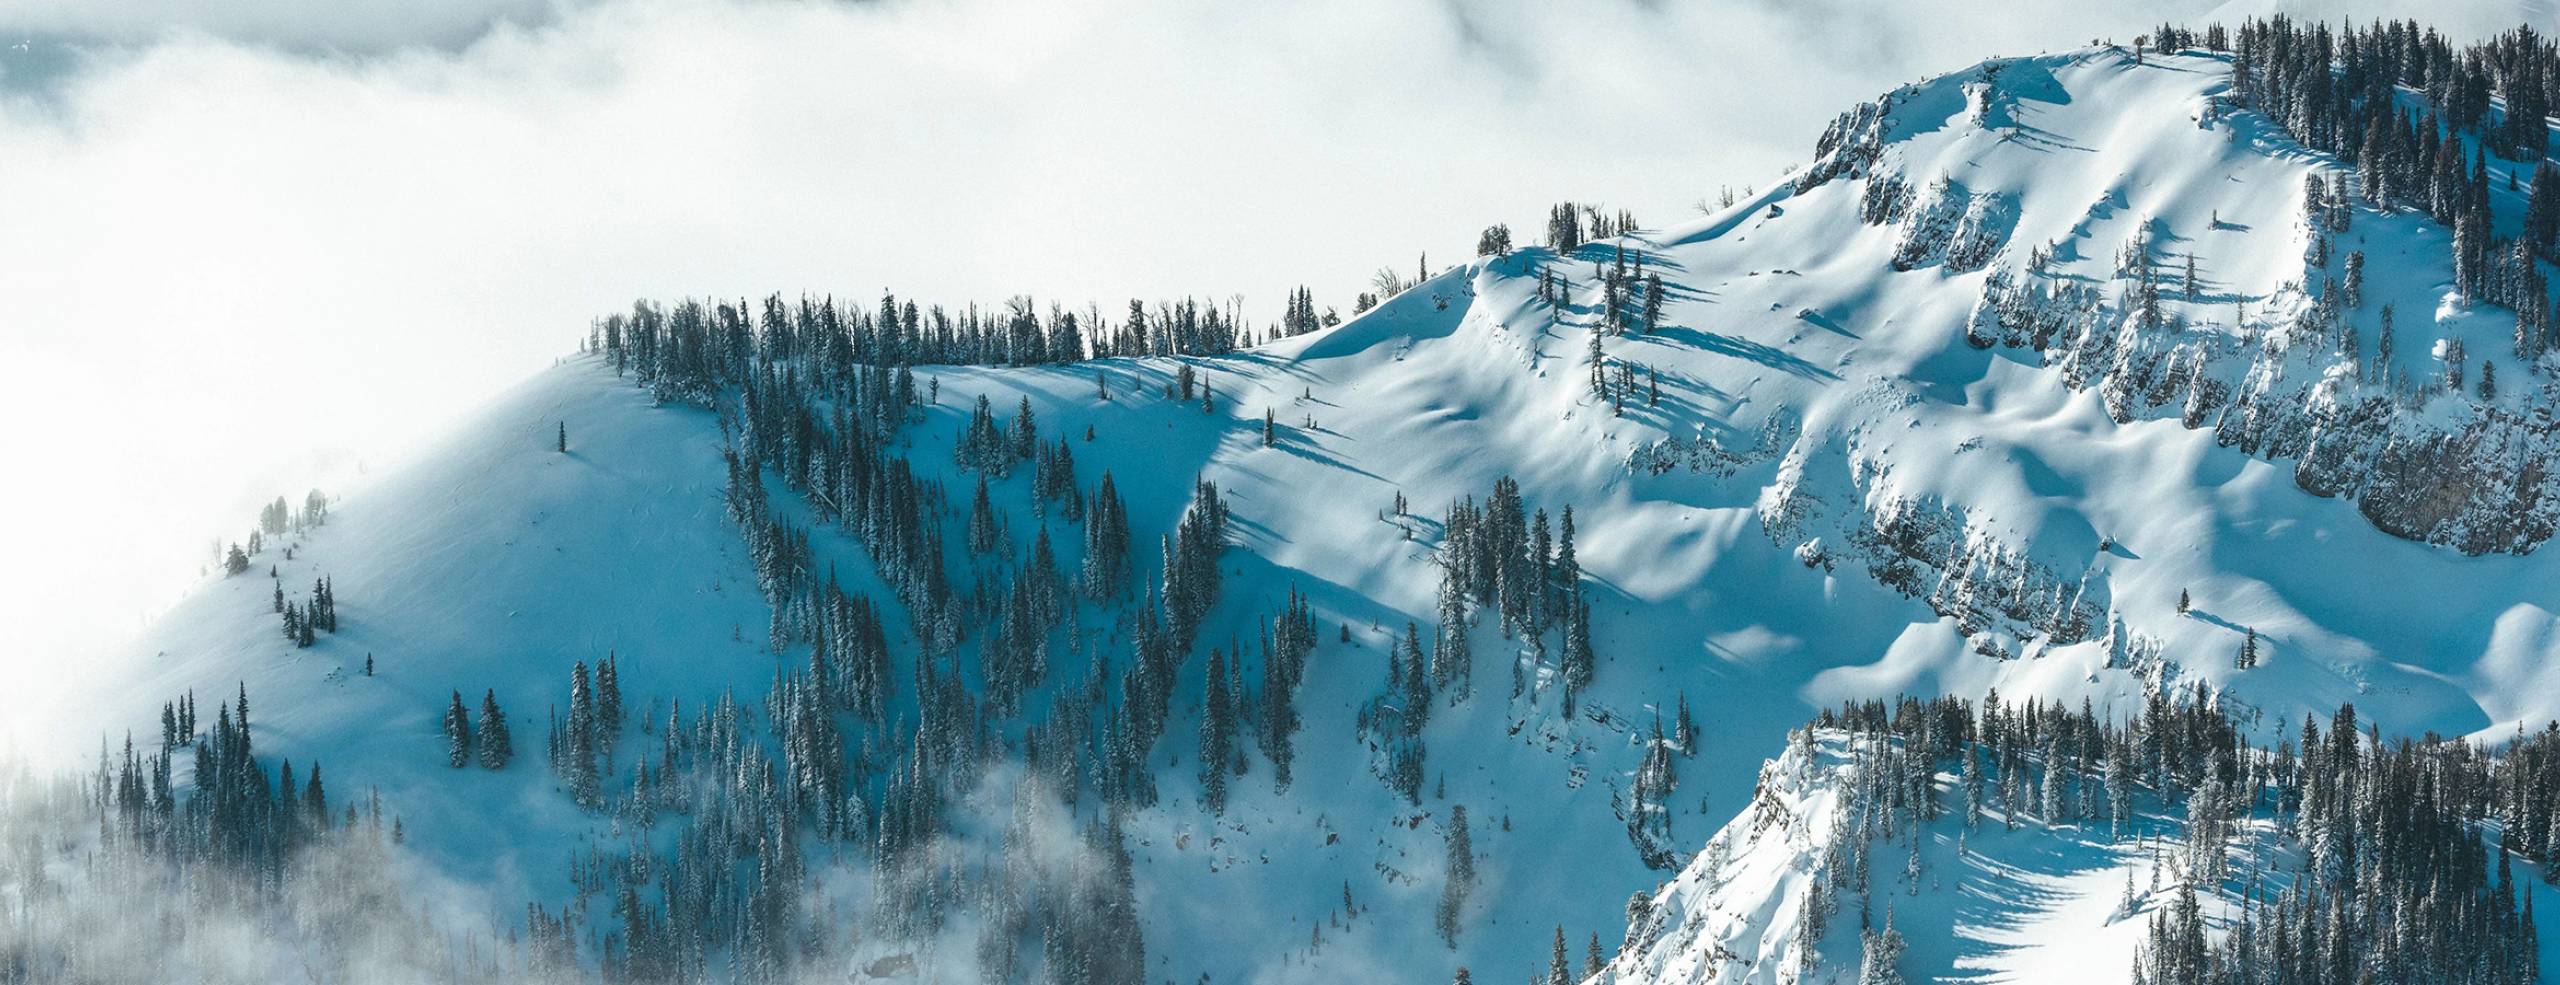 Untouched powder covering a section of Jackson Hole Mountain Resort